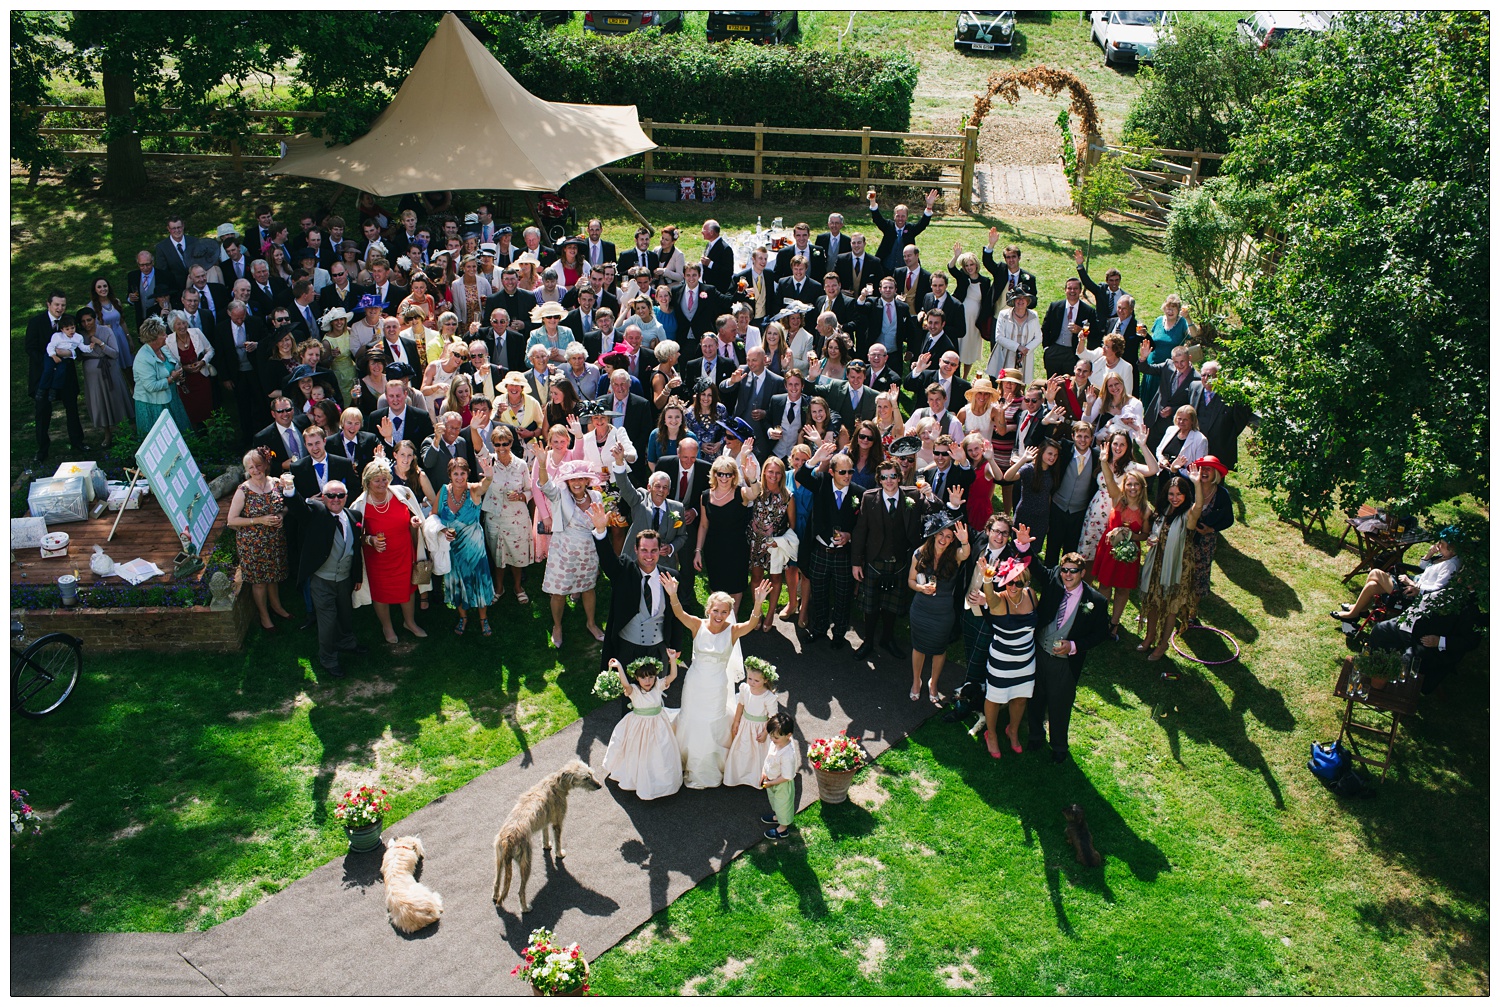 A photograph of all the wedding guests taken from a bedroom window looking down. The people are waving, the dogs are in the picture too.